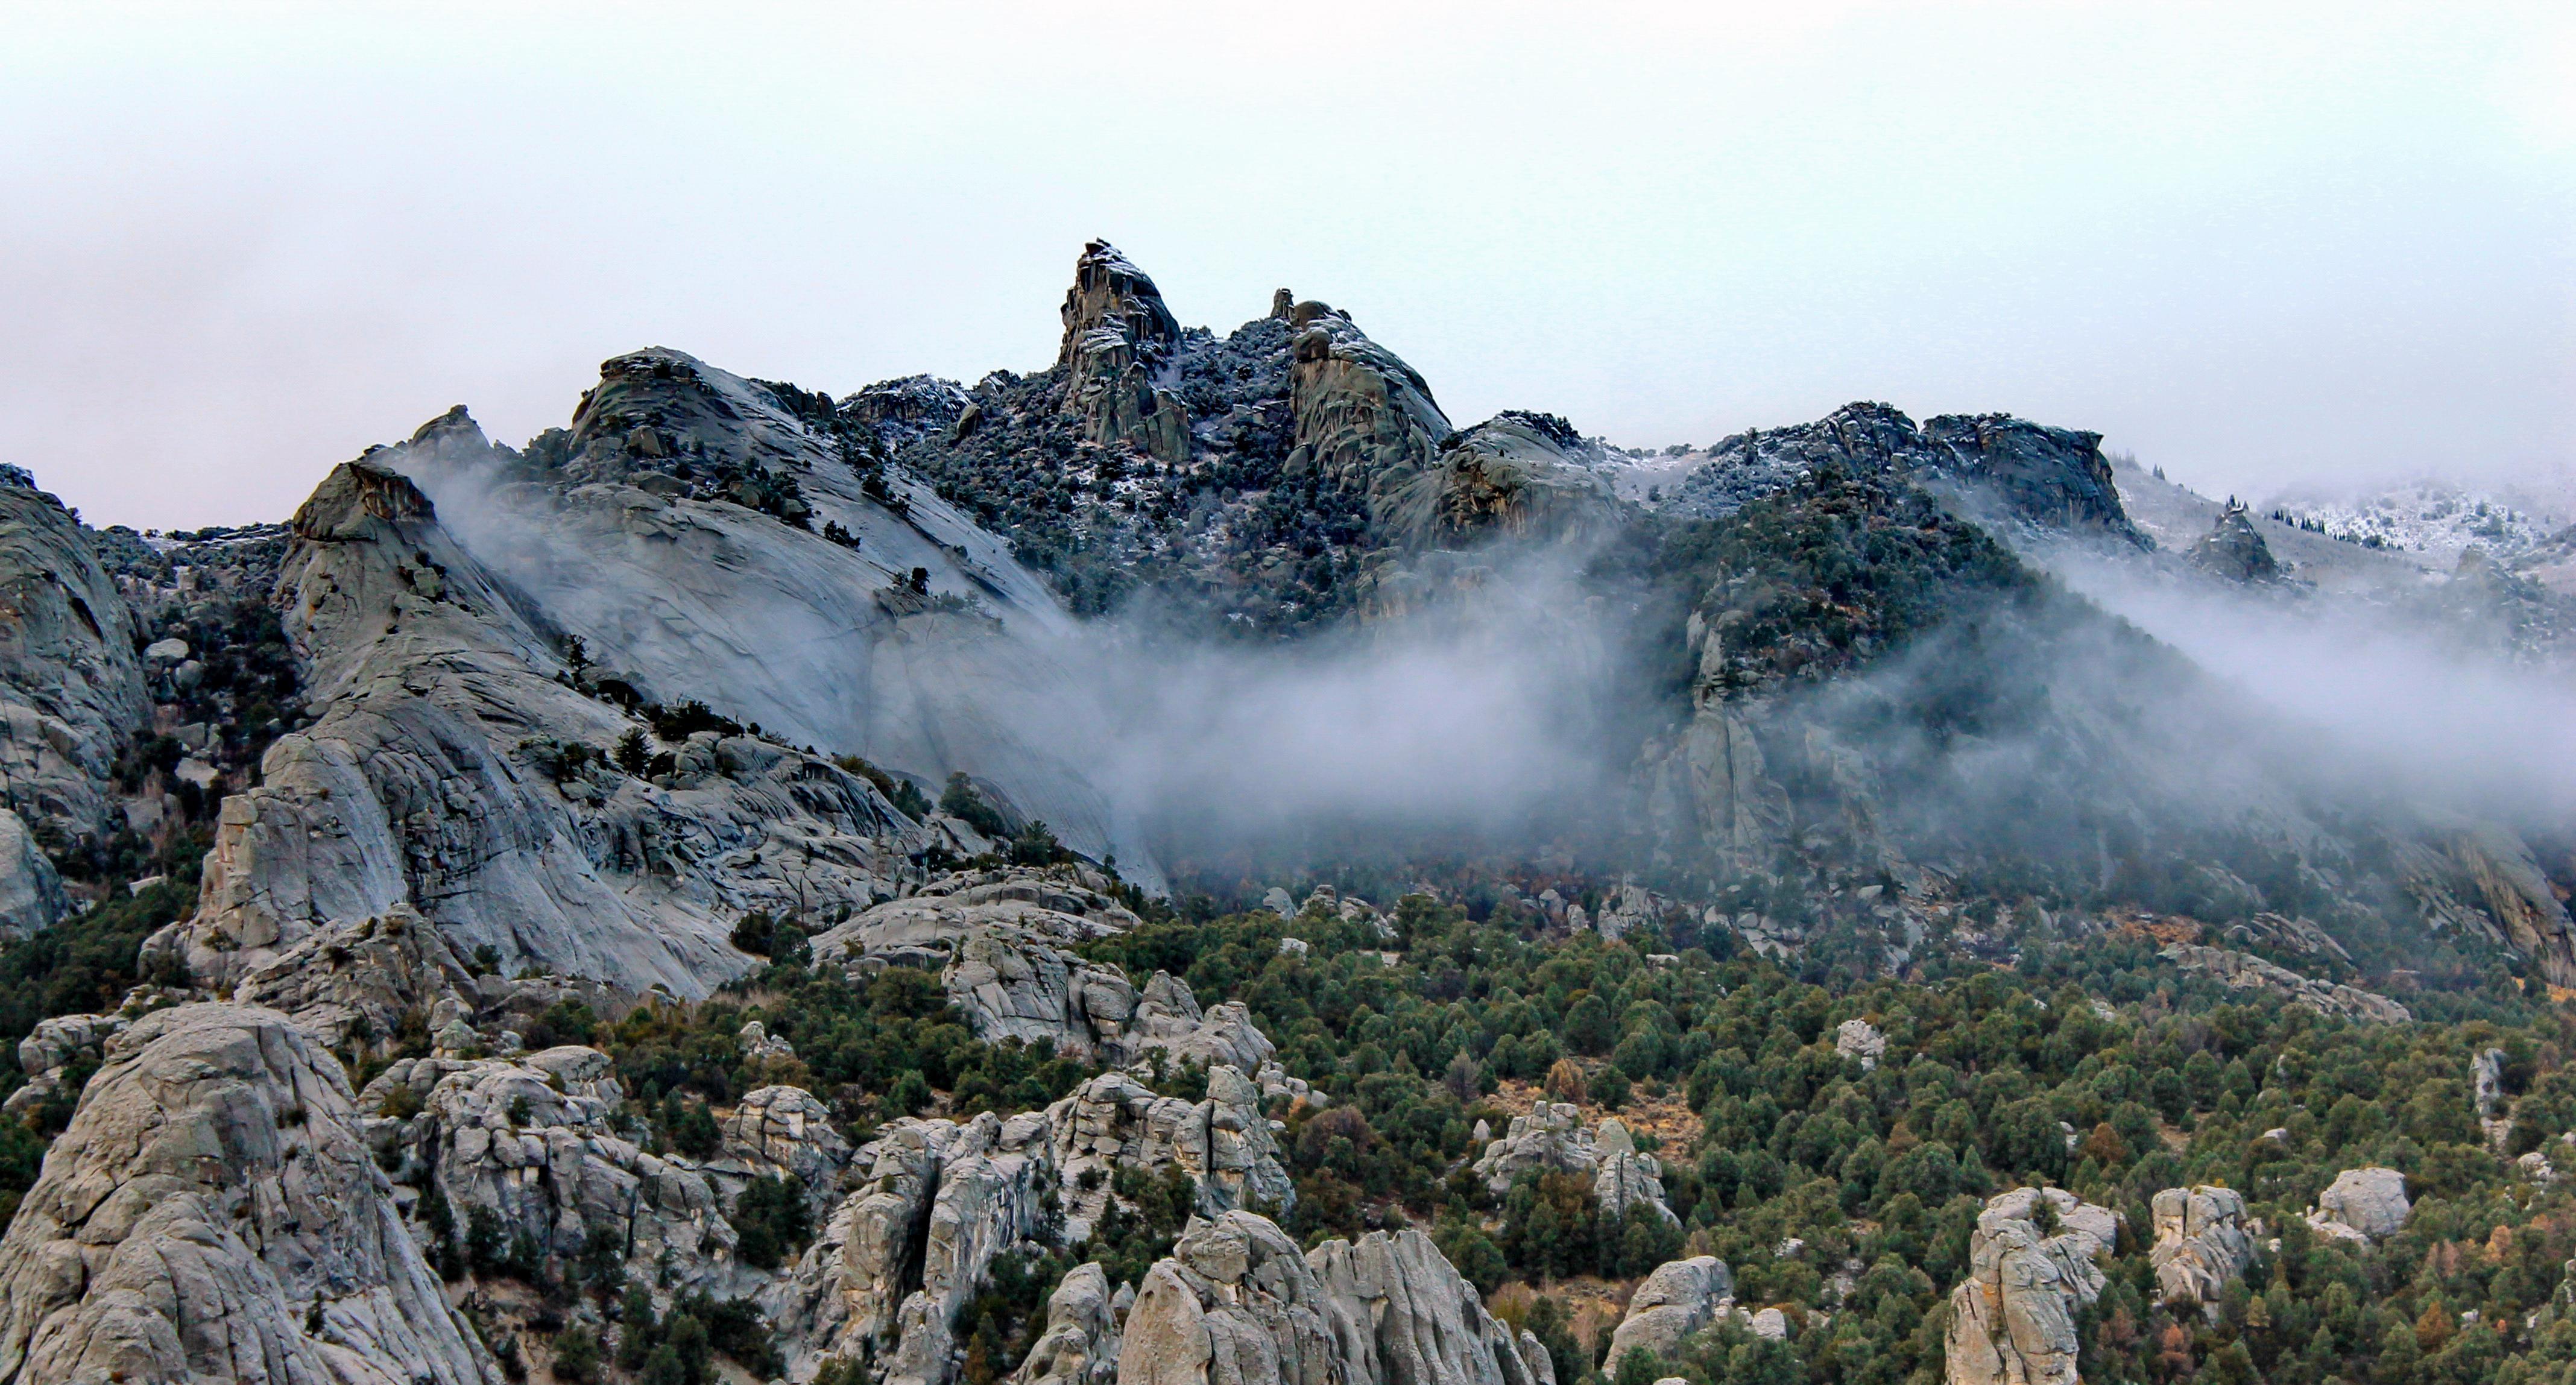 Snow dusted granite formations jut up from a mountainous juniper covered landscape.